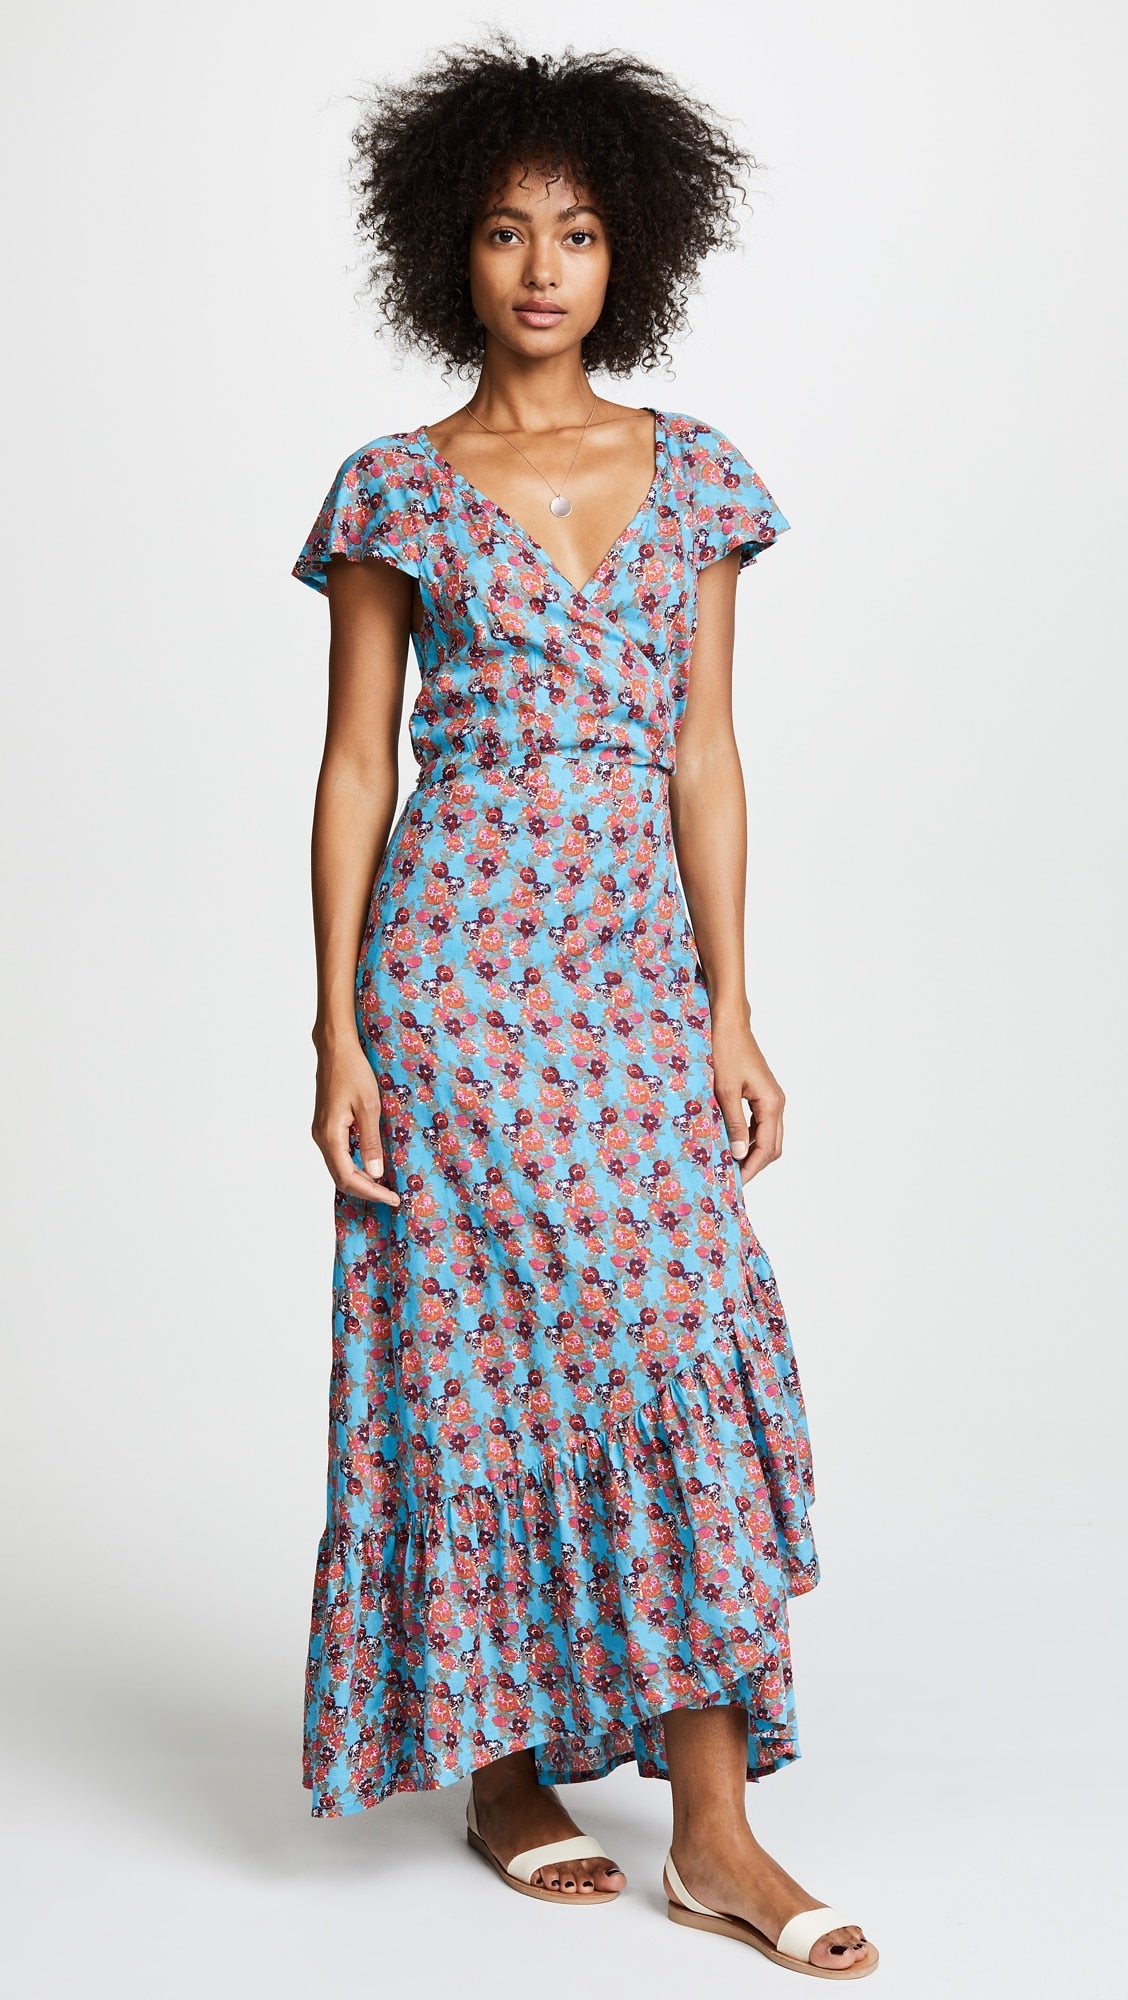 The Wrap Dresses That’ll Stay in Your Wardrobe For Years | Essence